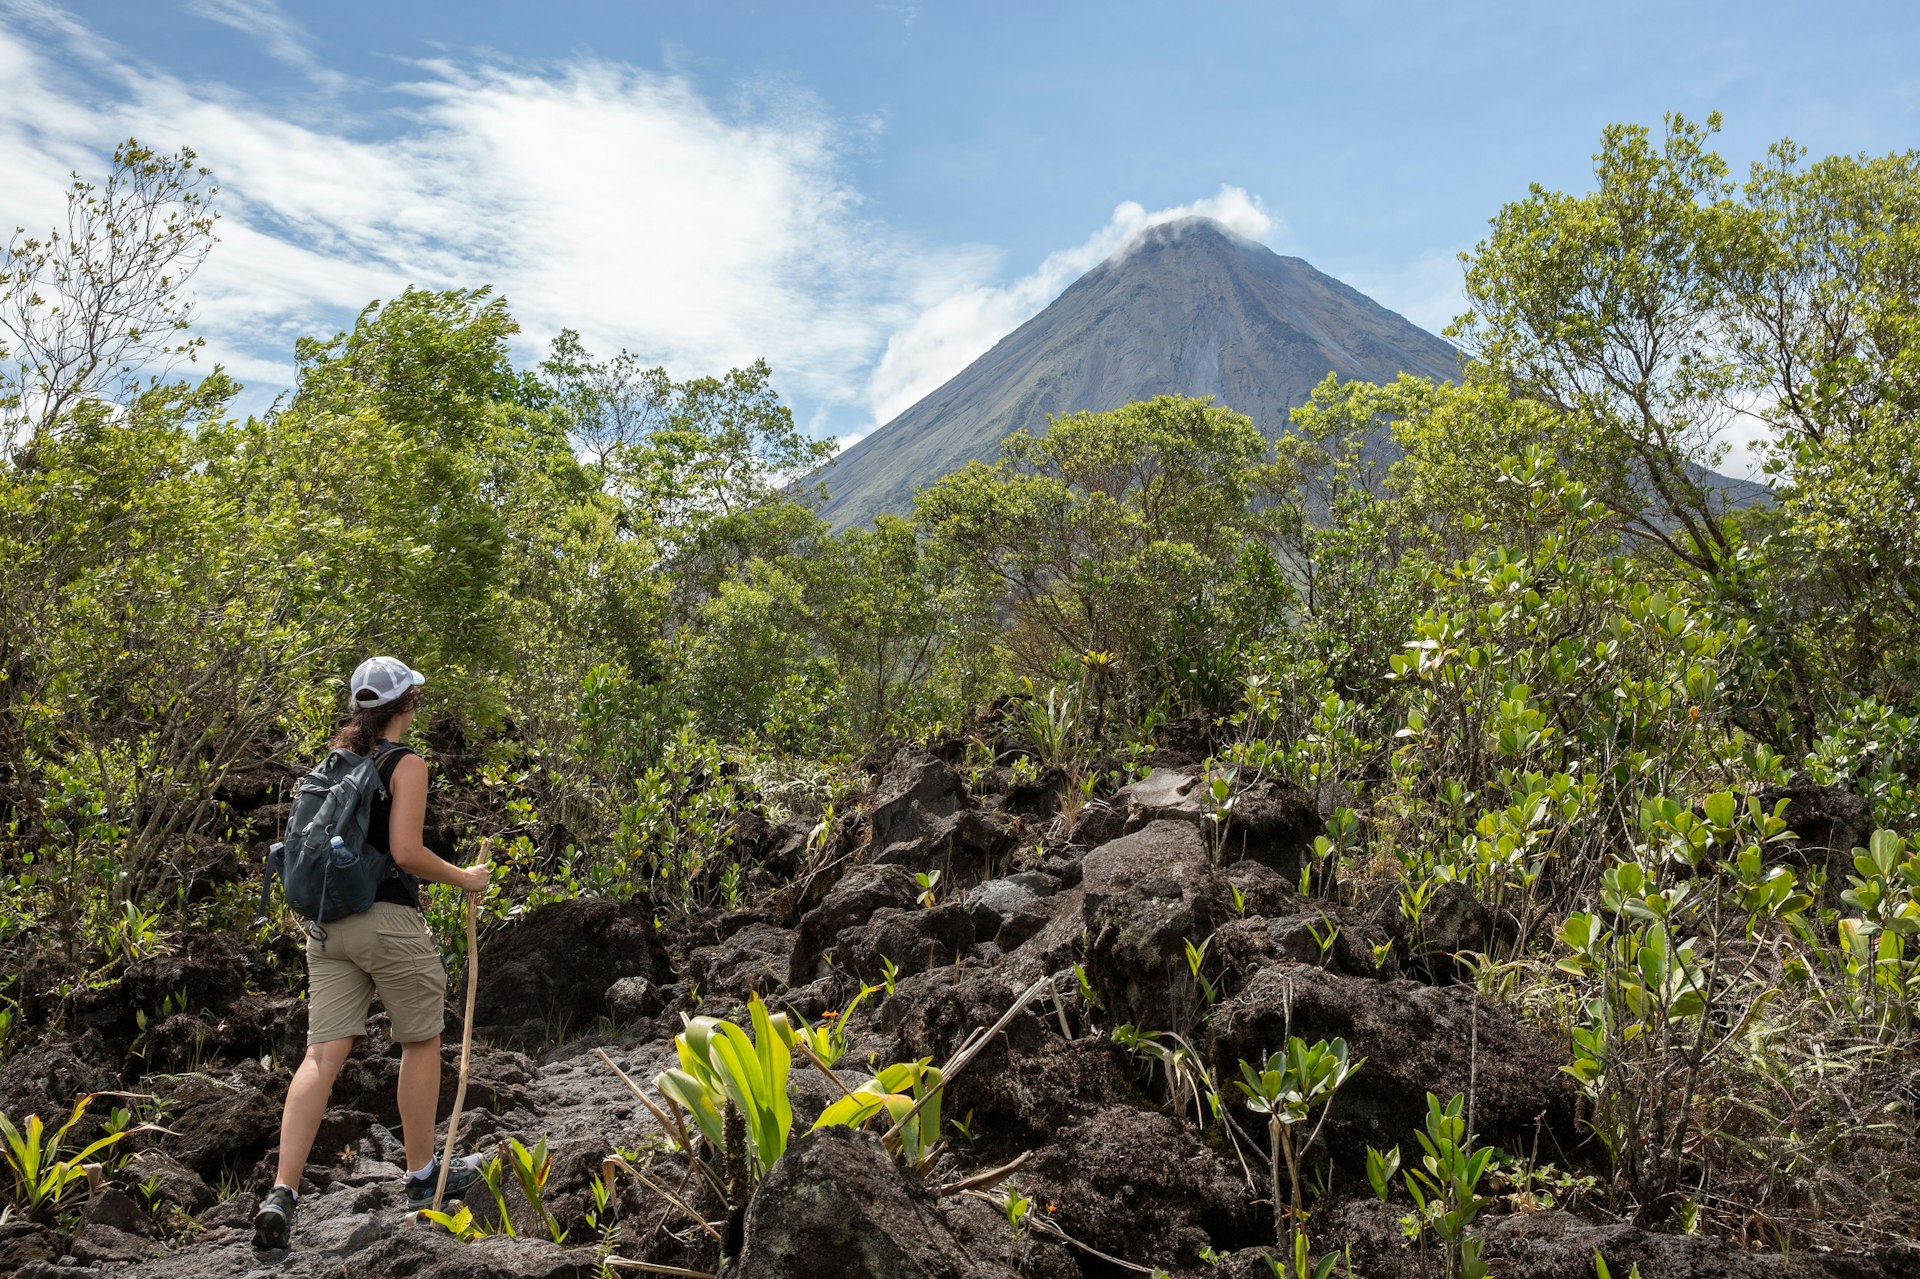 A woman hikes through volcanic boulders towards the treeline; in the distance are the steep slopes of Arenal volcano rising into the sky.